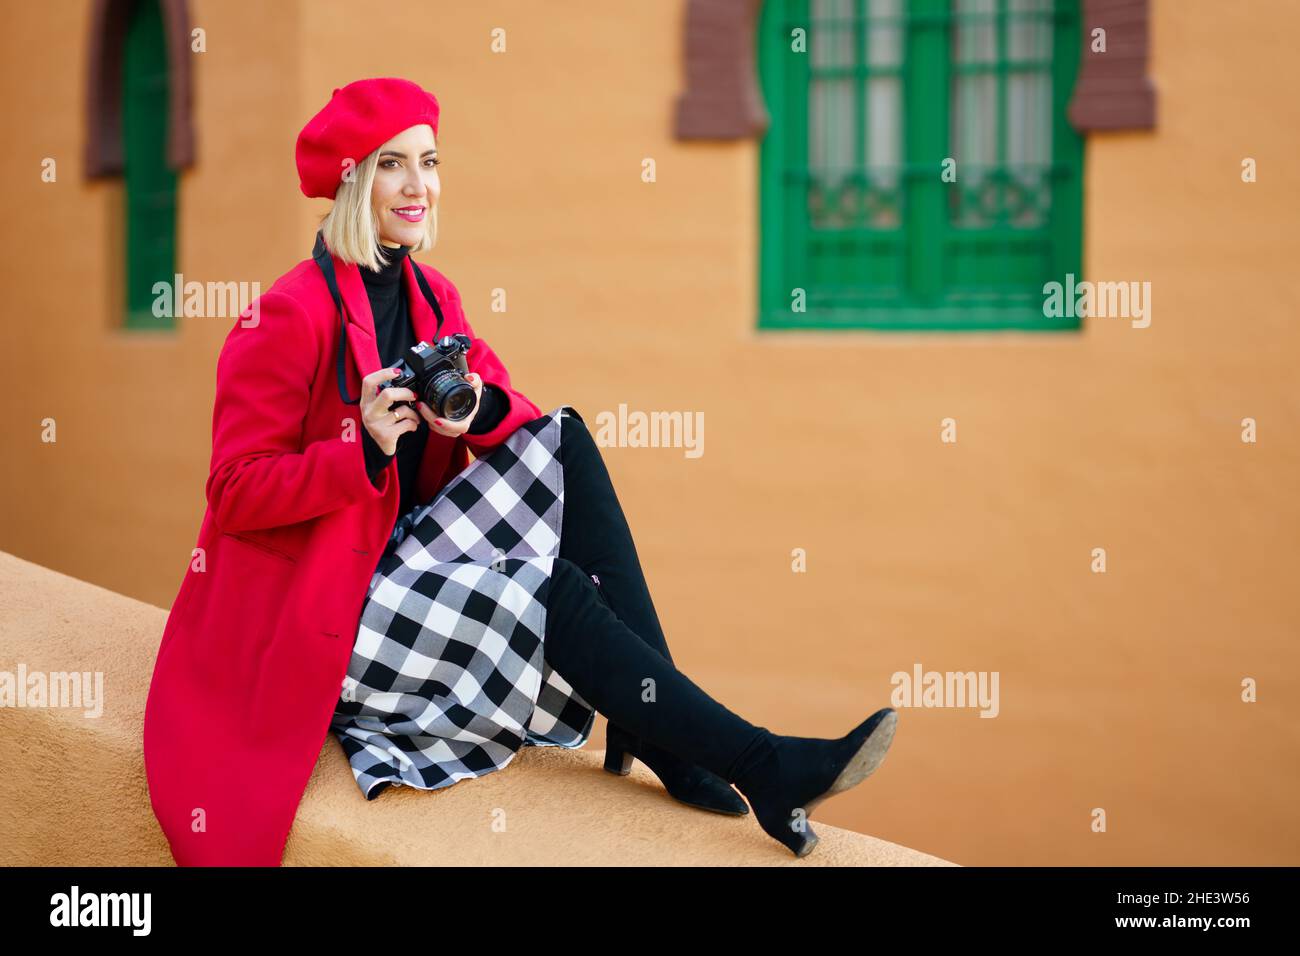 Woman wearing red winter clothes, taking pictures with an SLR camera sitting on a city wall. Stock Photo